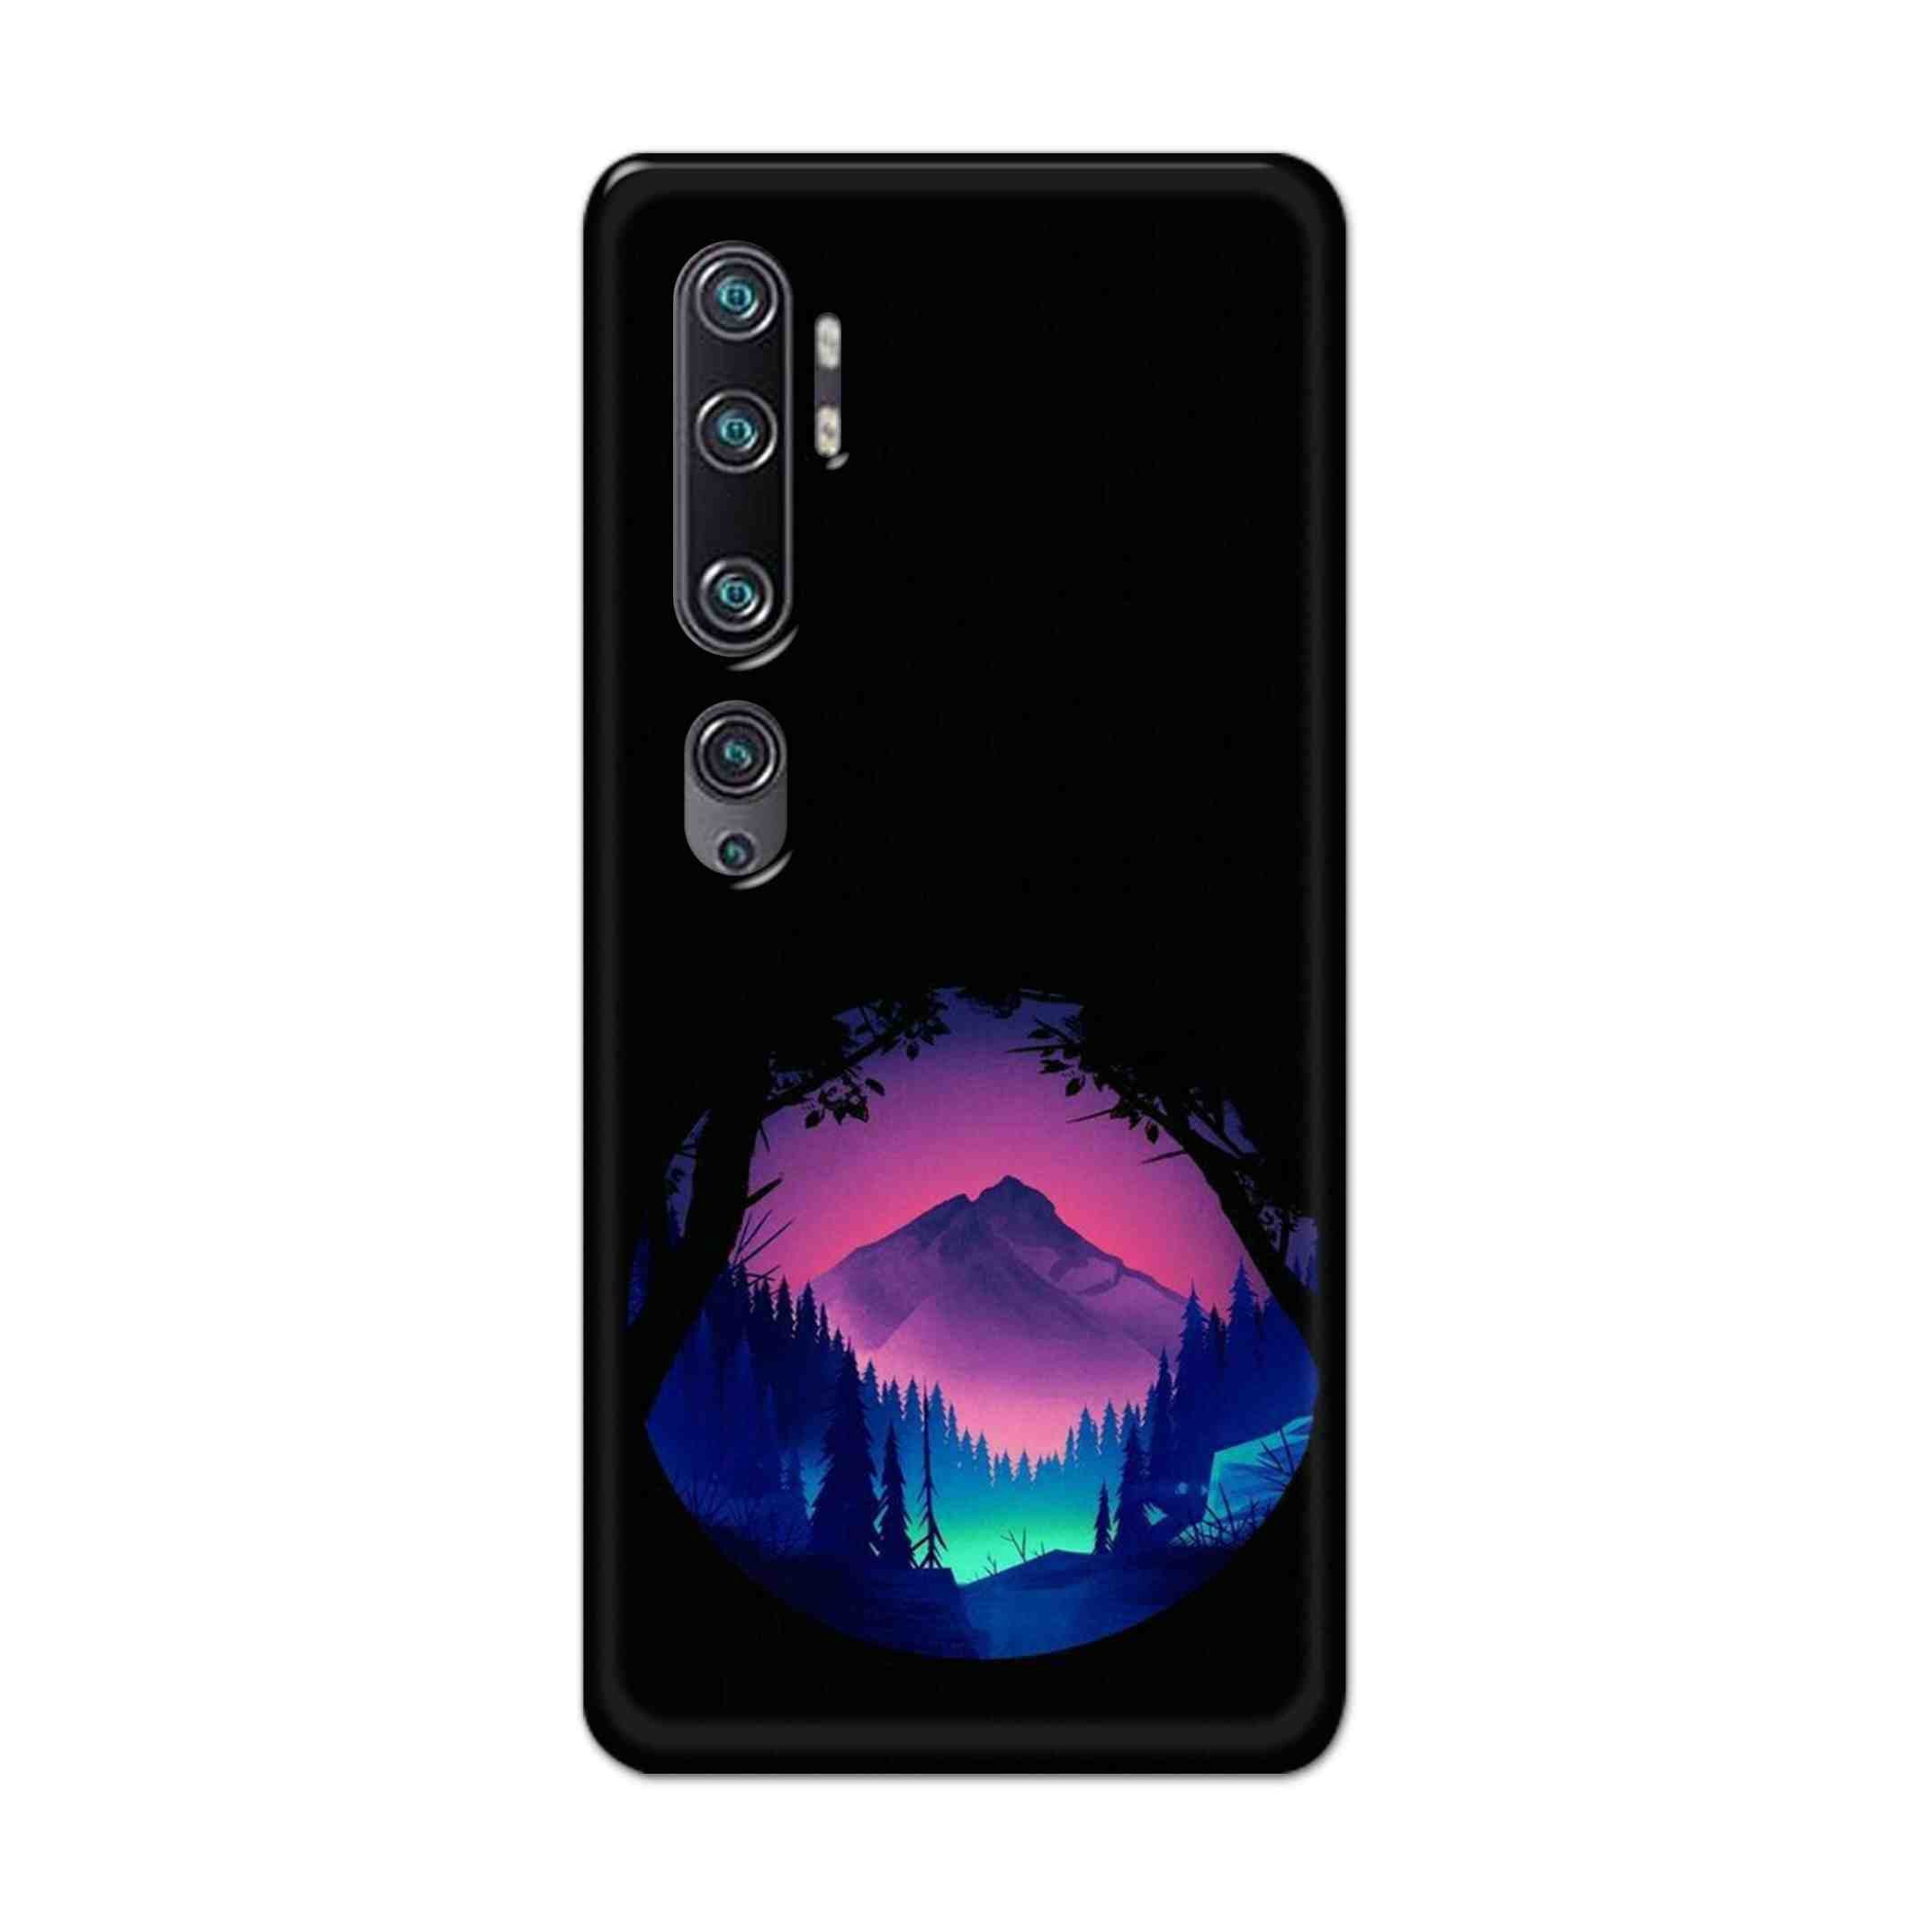 Buy Neon Tables Hard Back Mobile Phone Case Cover For Xiaomi Mi Note 10 Pro Online